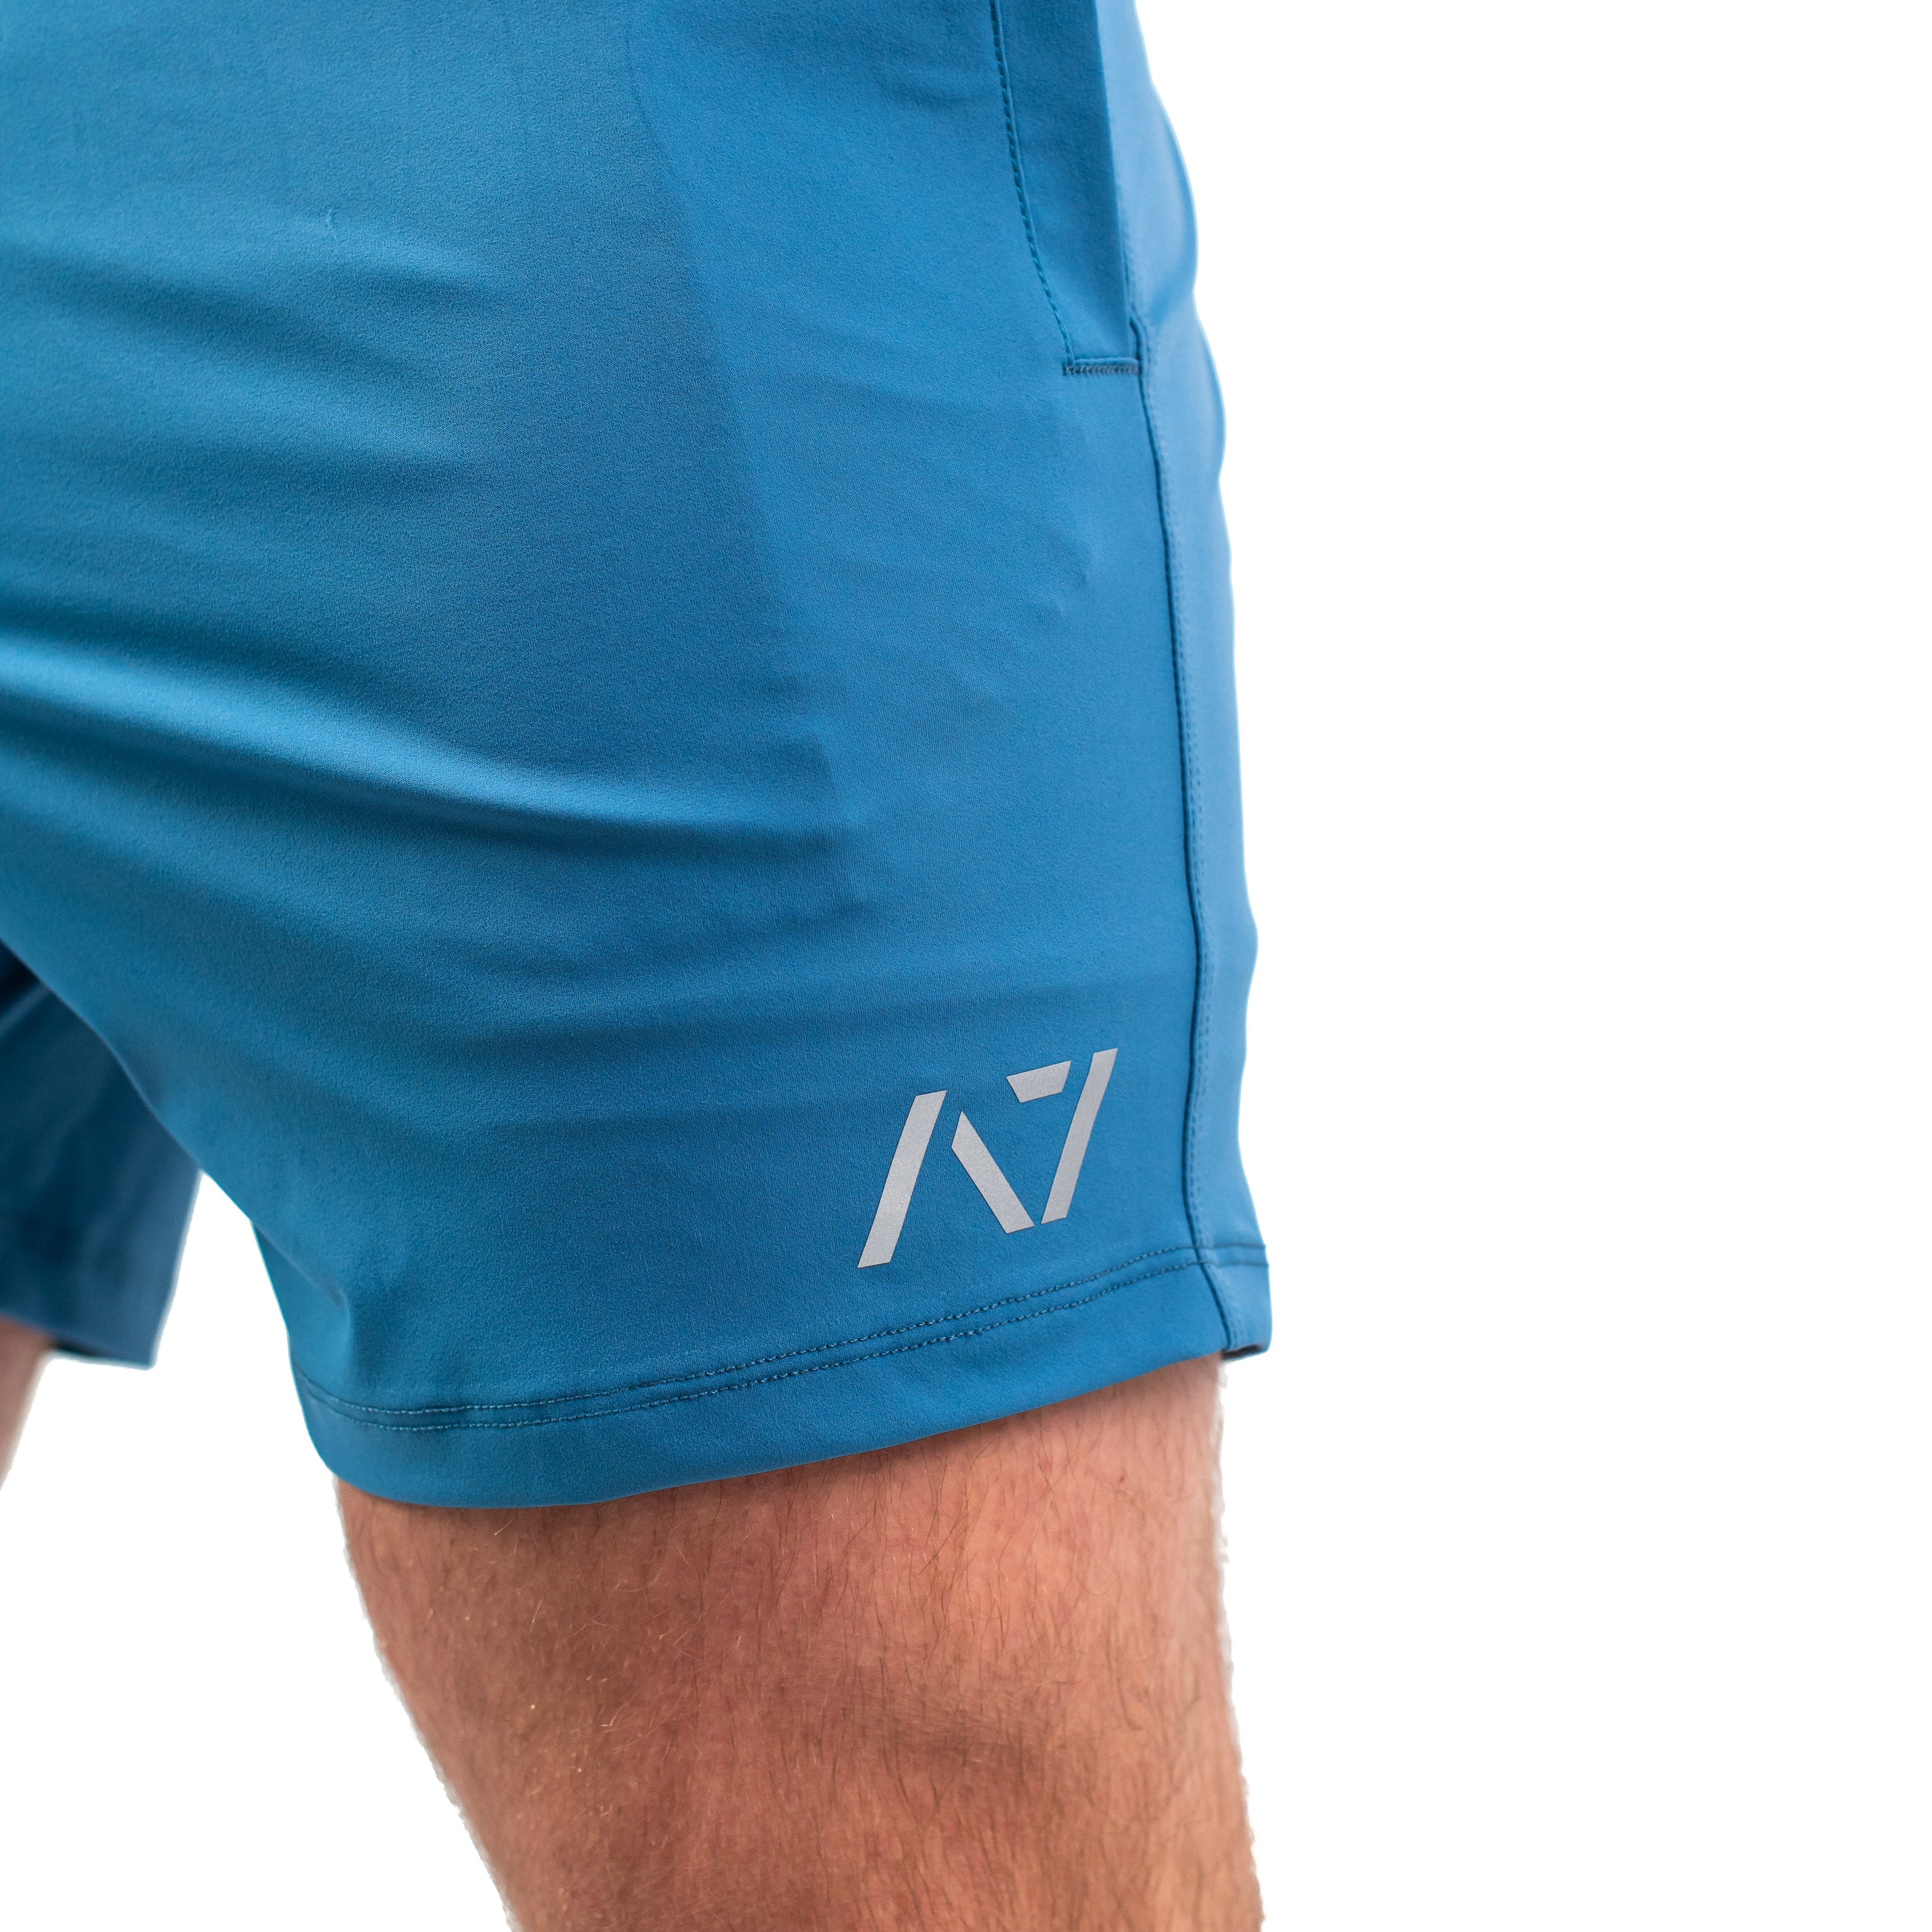 In life, the challenges we all face take Courage and Honour. This blue color was chosen for 360Go KWD Shorts to represent the honour, valour and compassion. These shorts offer 360 degrees of stretch in all angles and allow you to remain comfortable without limiting any movement in both training and life environments.